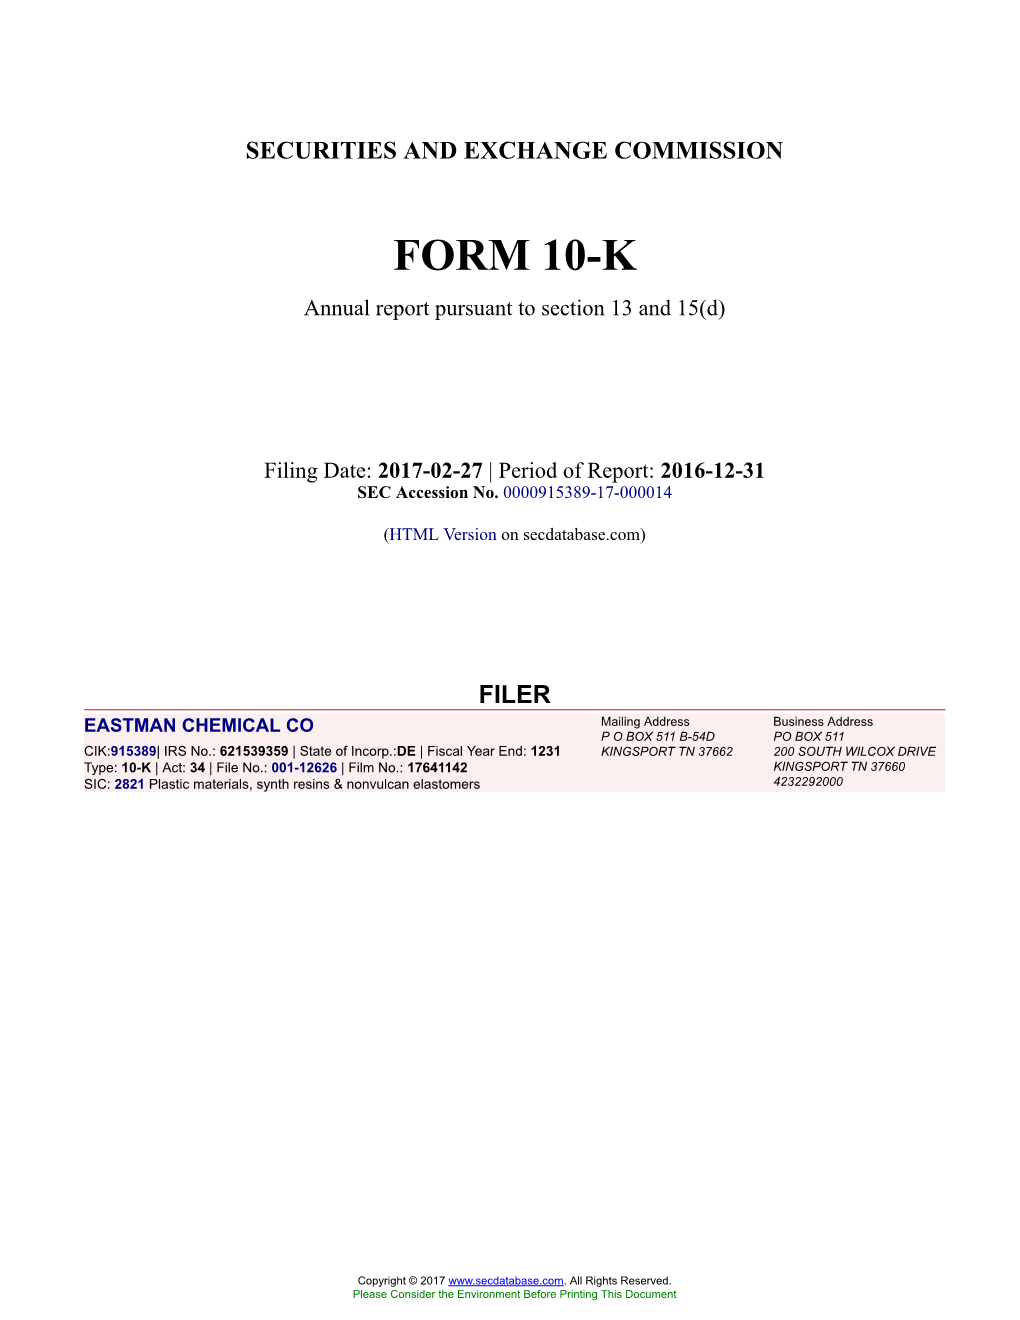 EASTMAN CHEMICAL CO Form 10-K Annual Report Filed 2017-02-27